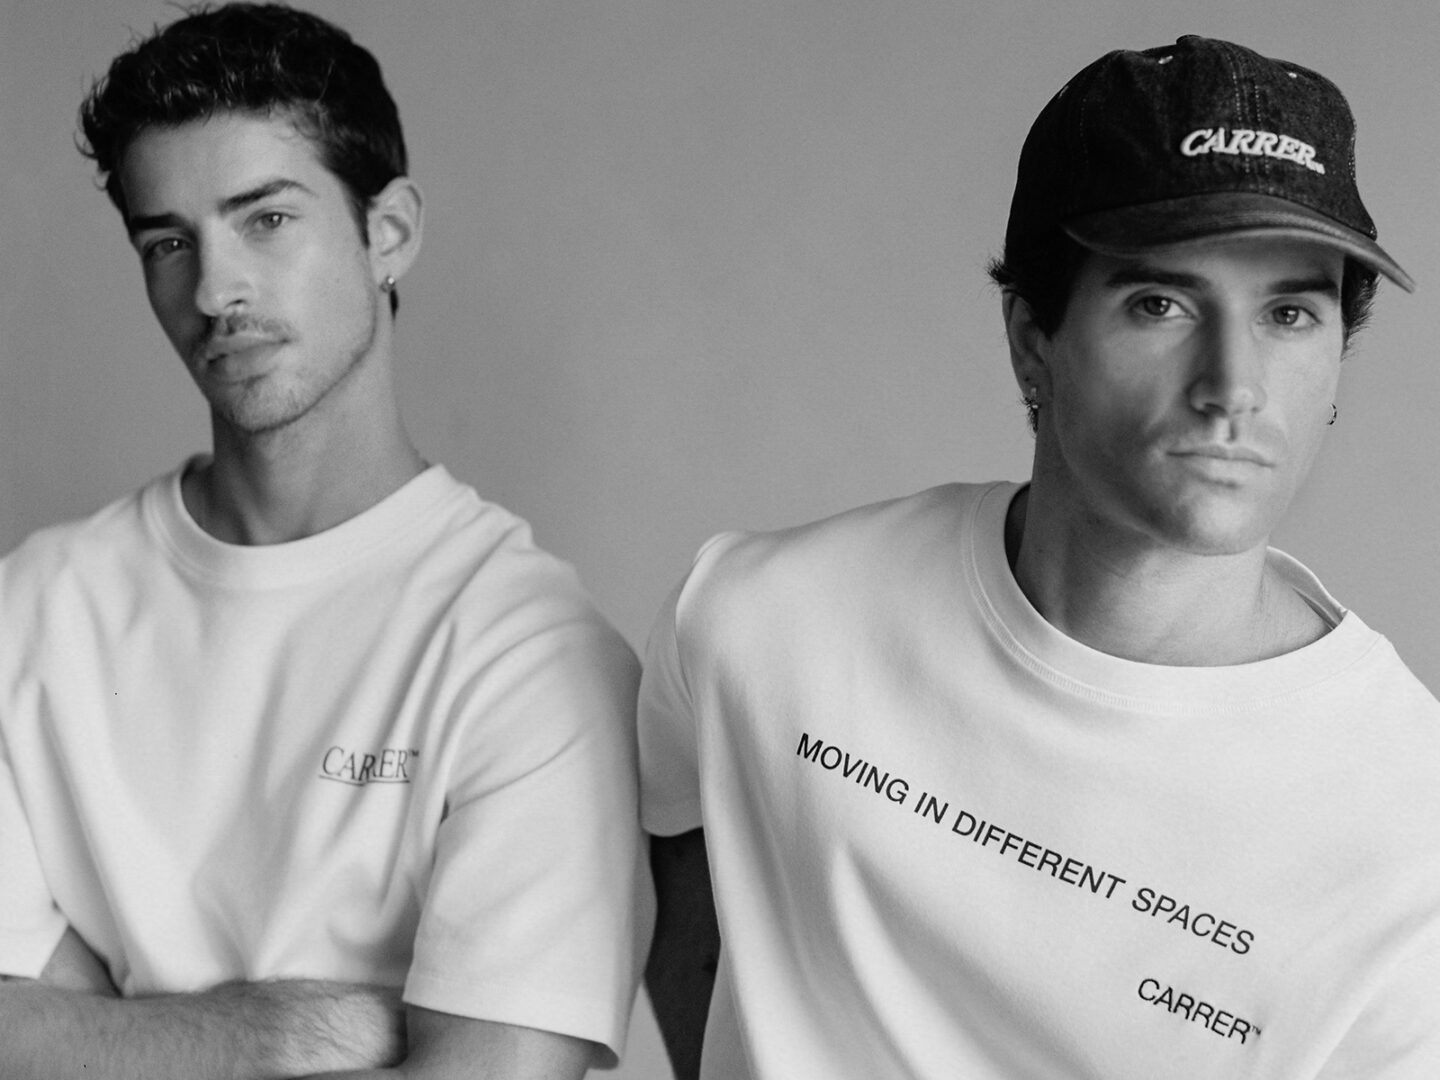 BREAKING NEWS! Manu Ríos and Marc Forné launch today their clothing brand Carrer